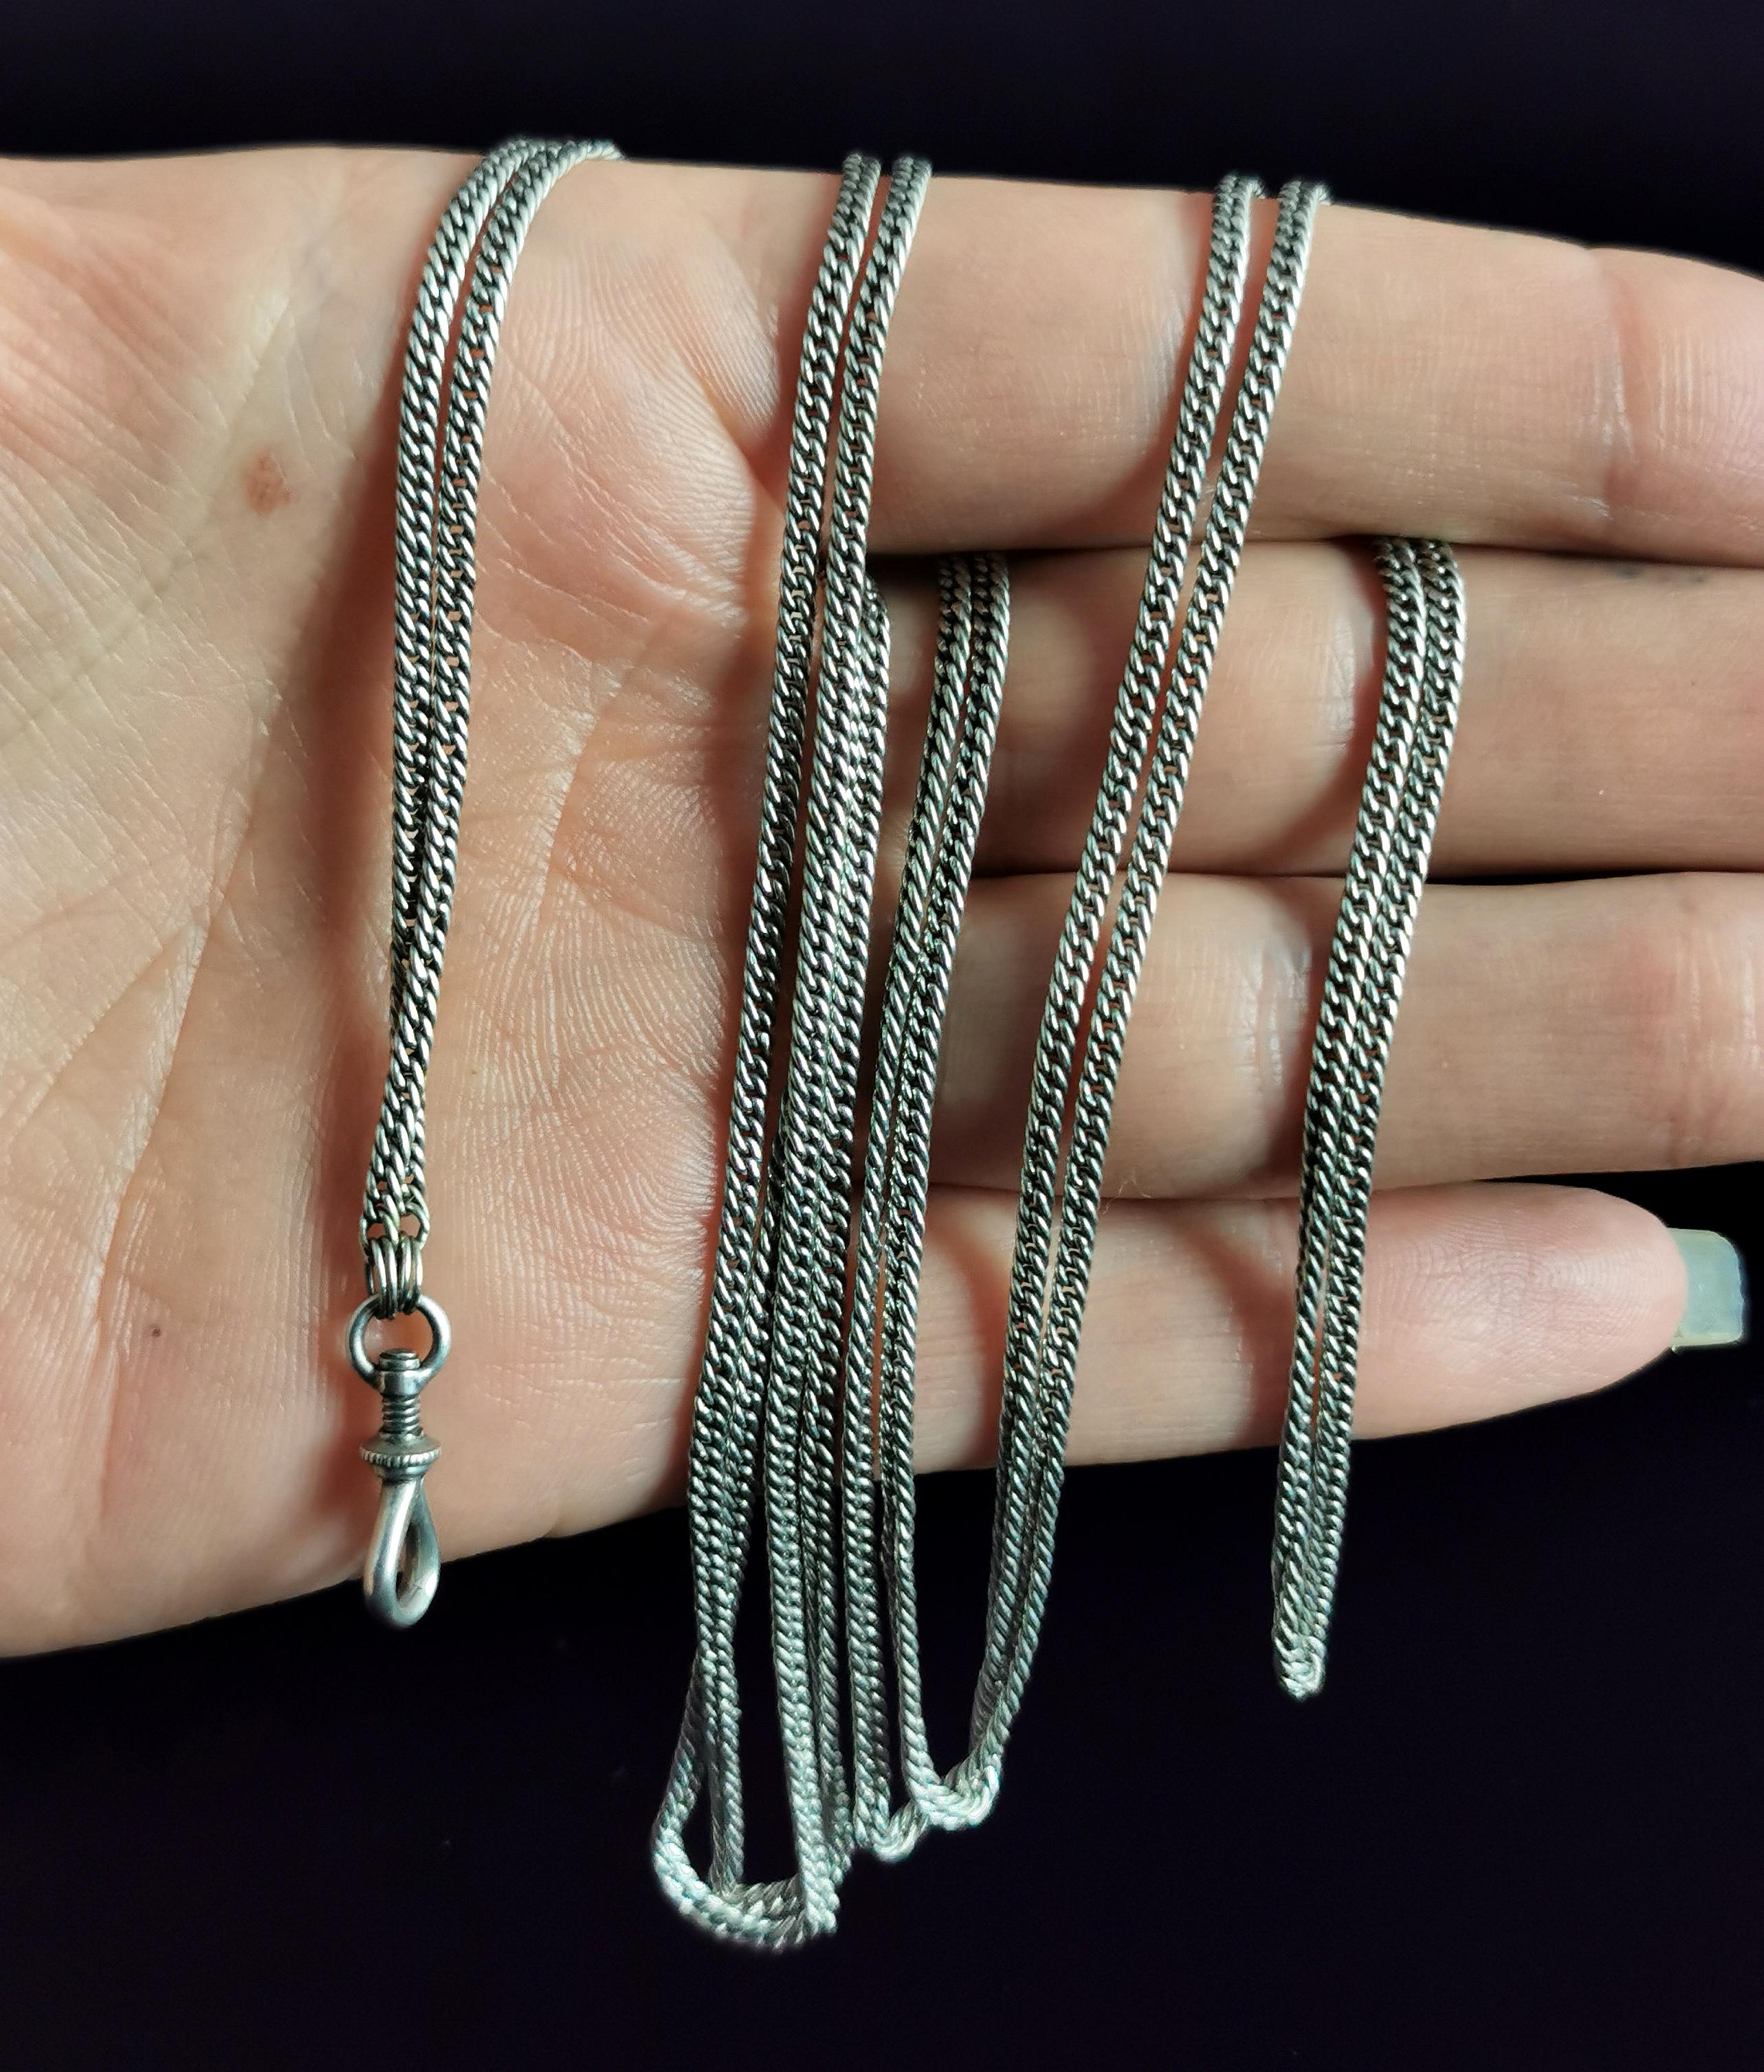 Antique Sterling Silver Longuard Chain Necklace, Muff Chain, Edwardian 1